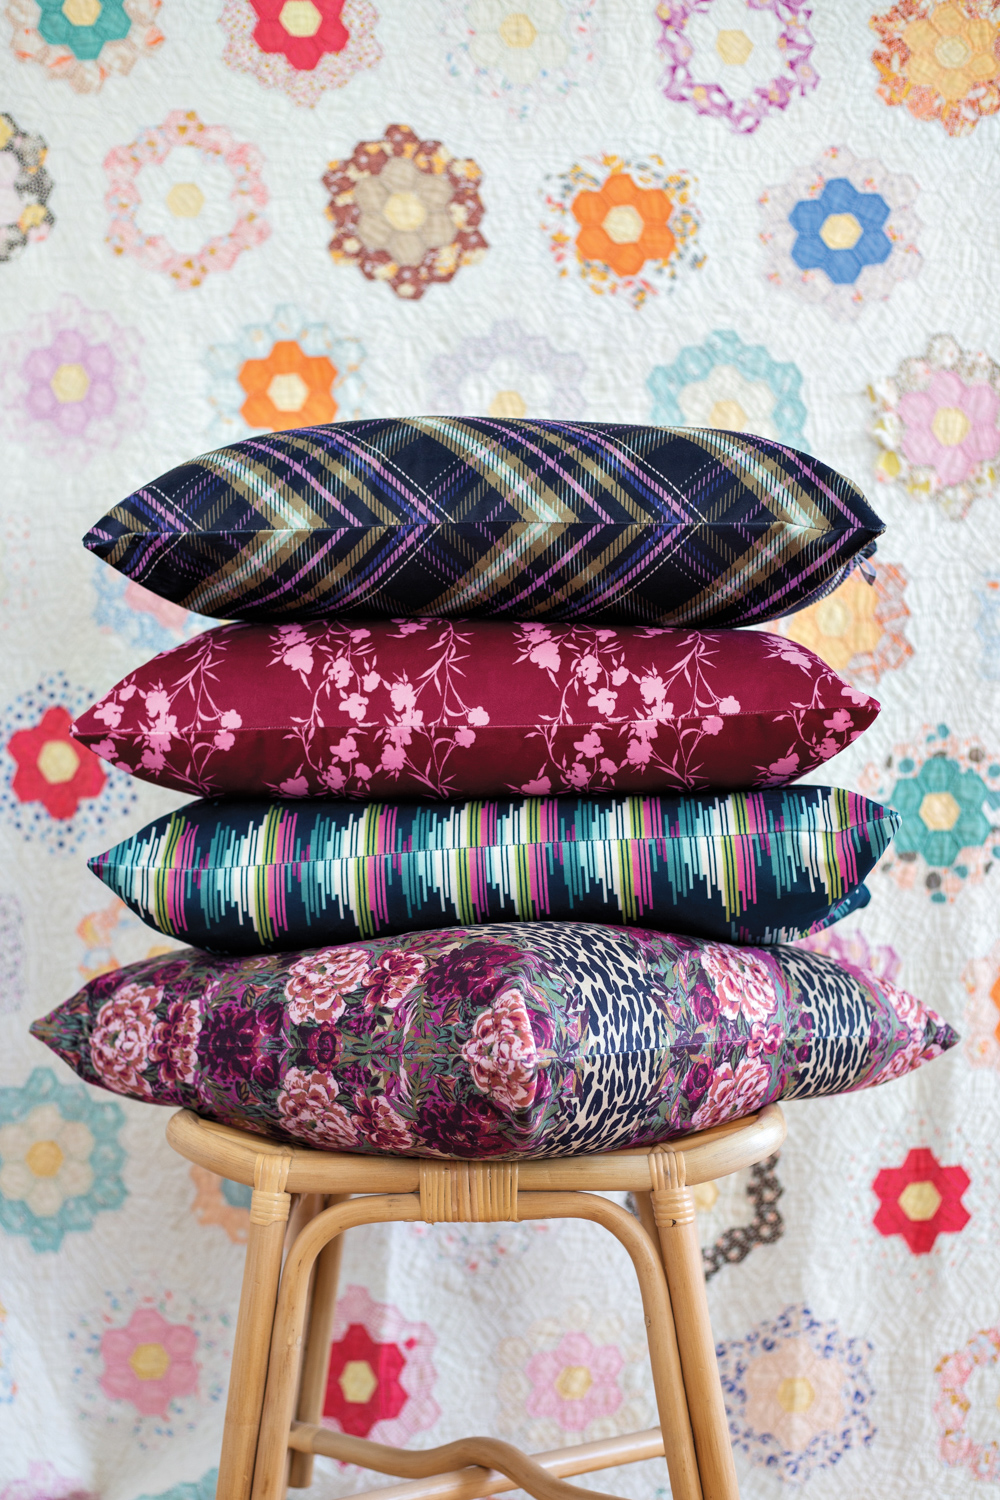 4 boldly patterned throw pillows stacked on a stool against a colorful background